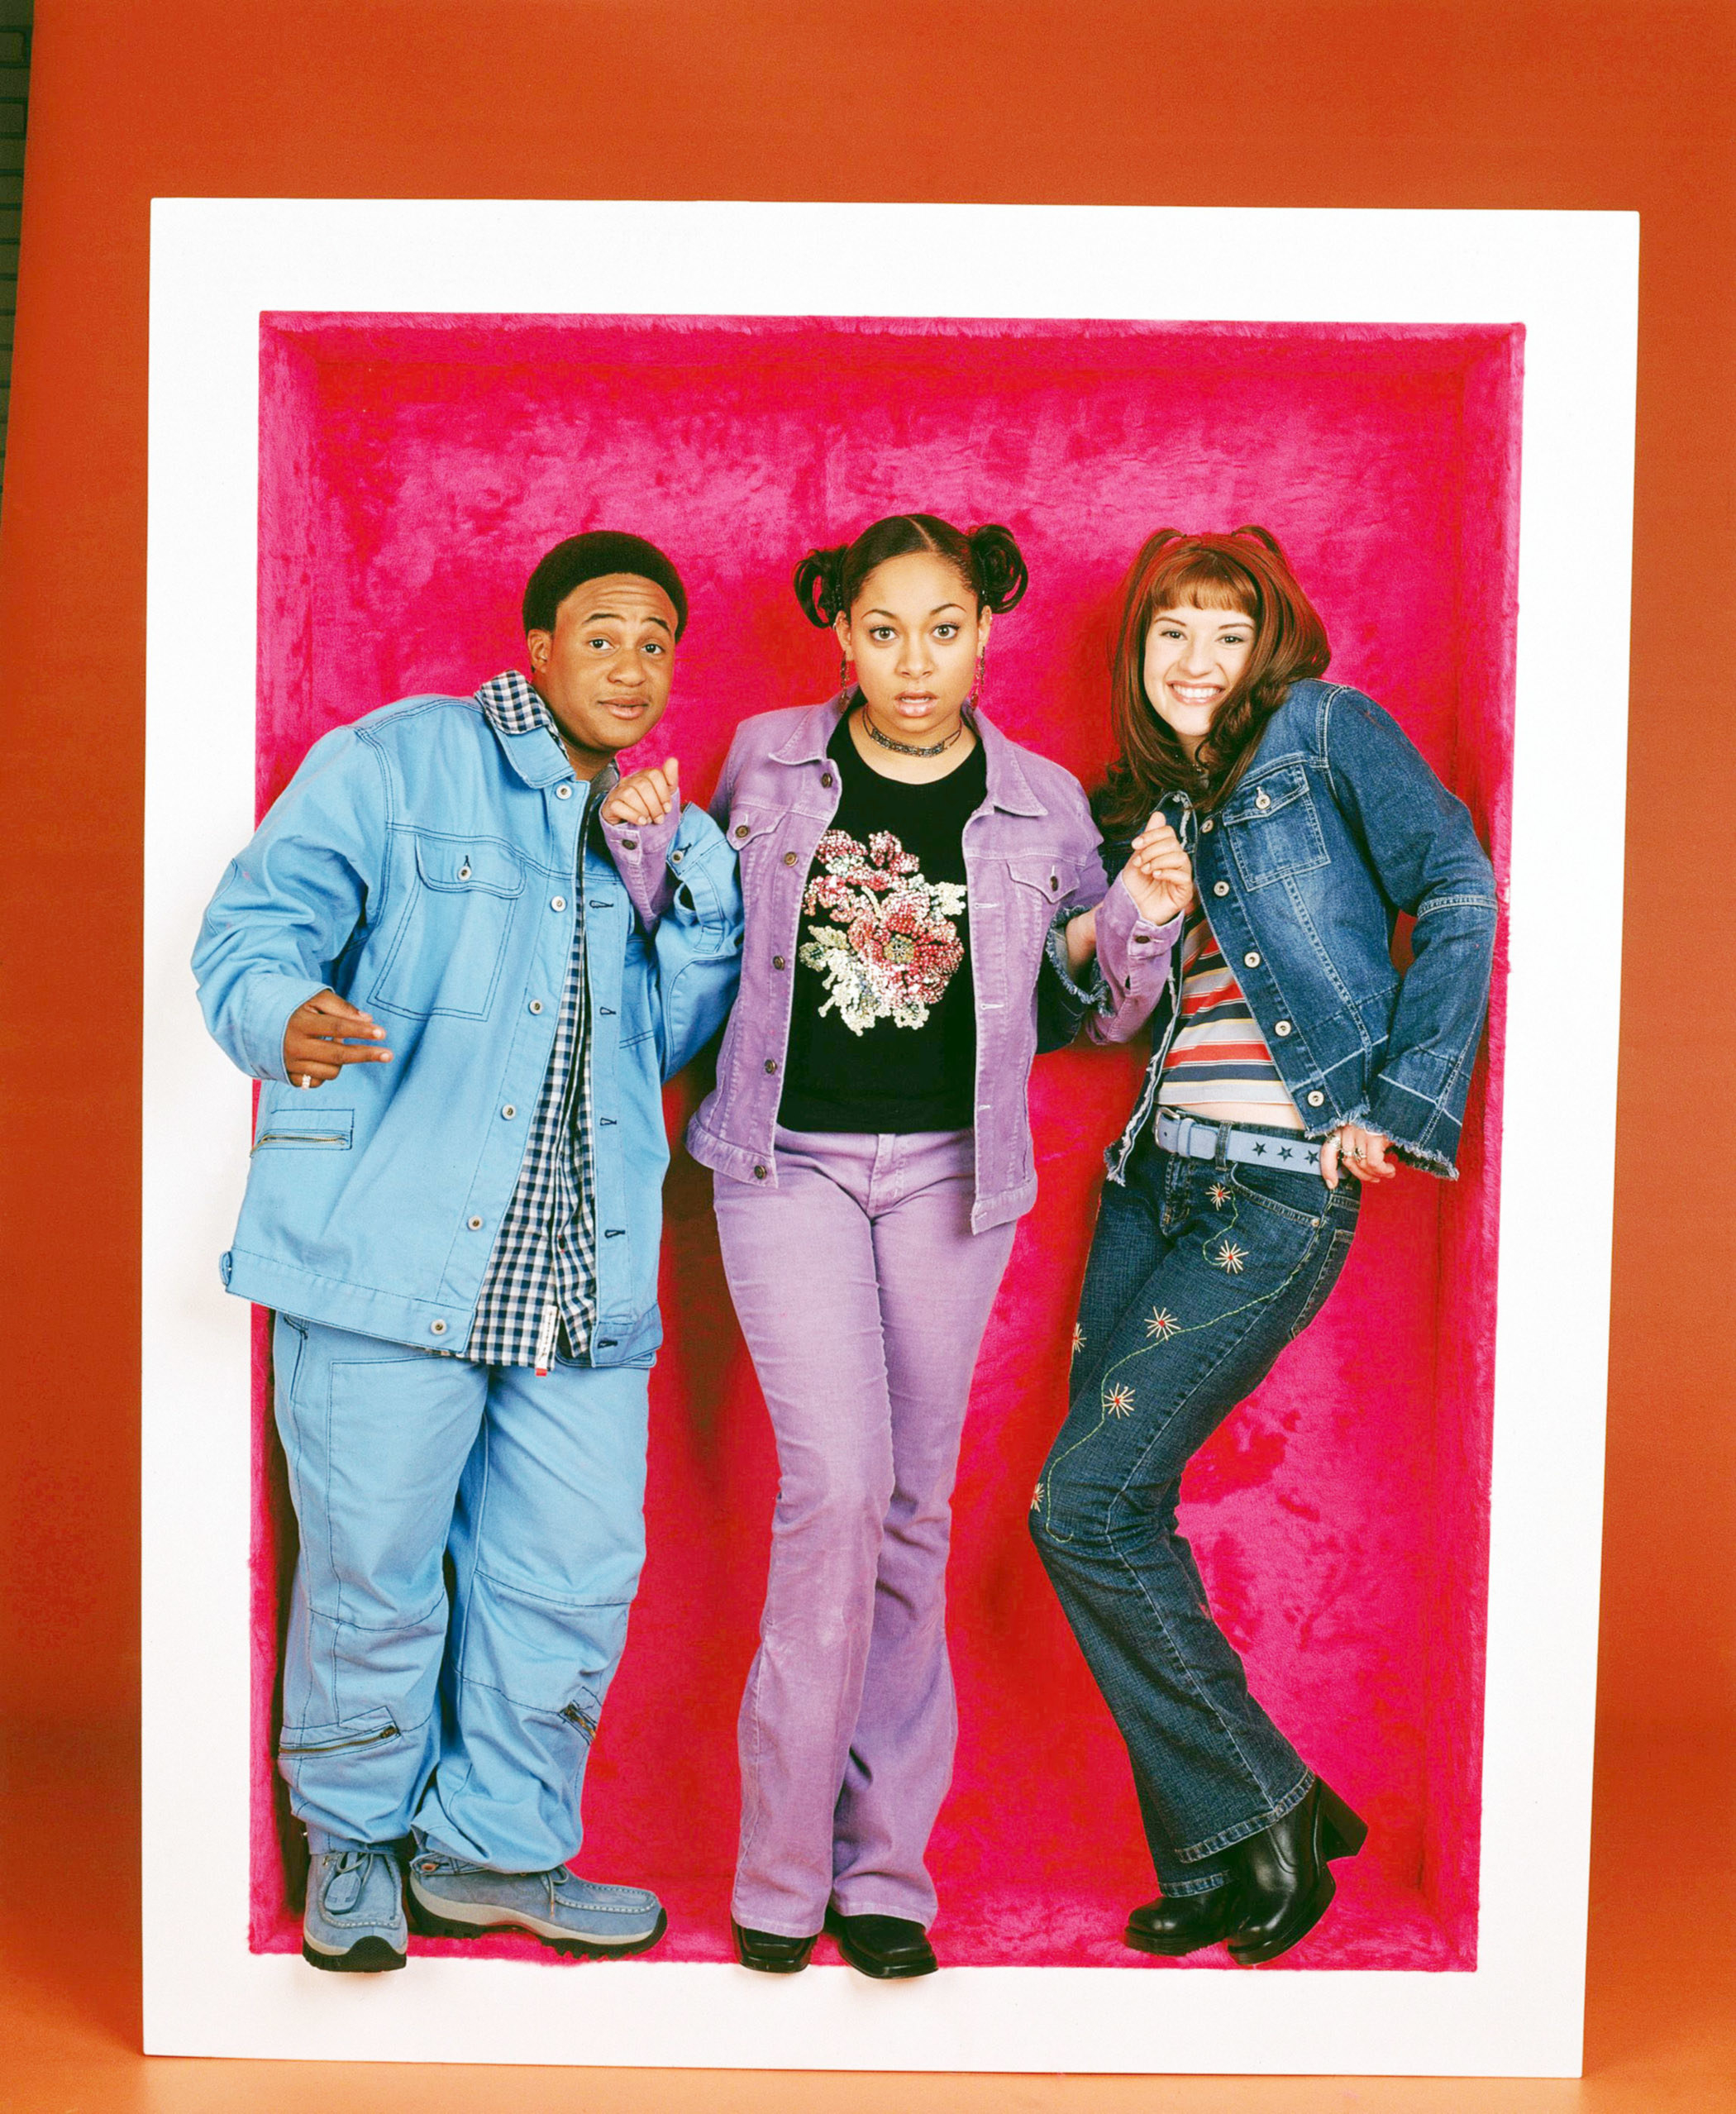 From left to right: Orlando Brown, Raven, and Anneliese posing for a promo pic for the show inside a life-sized frame